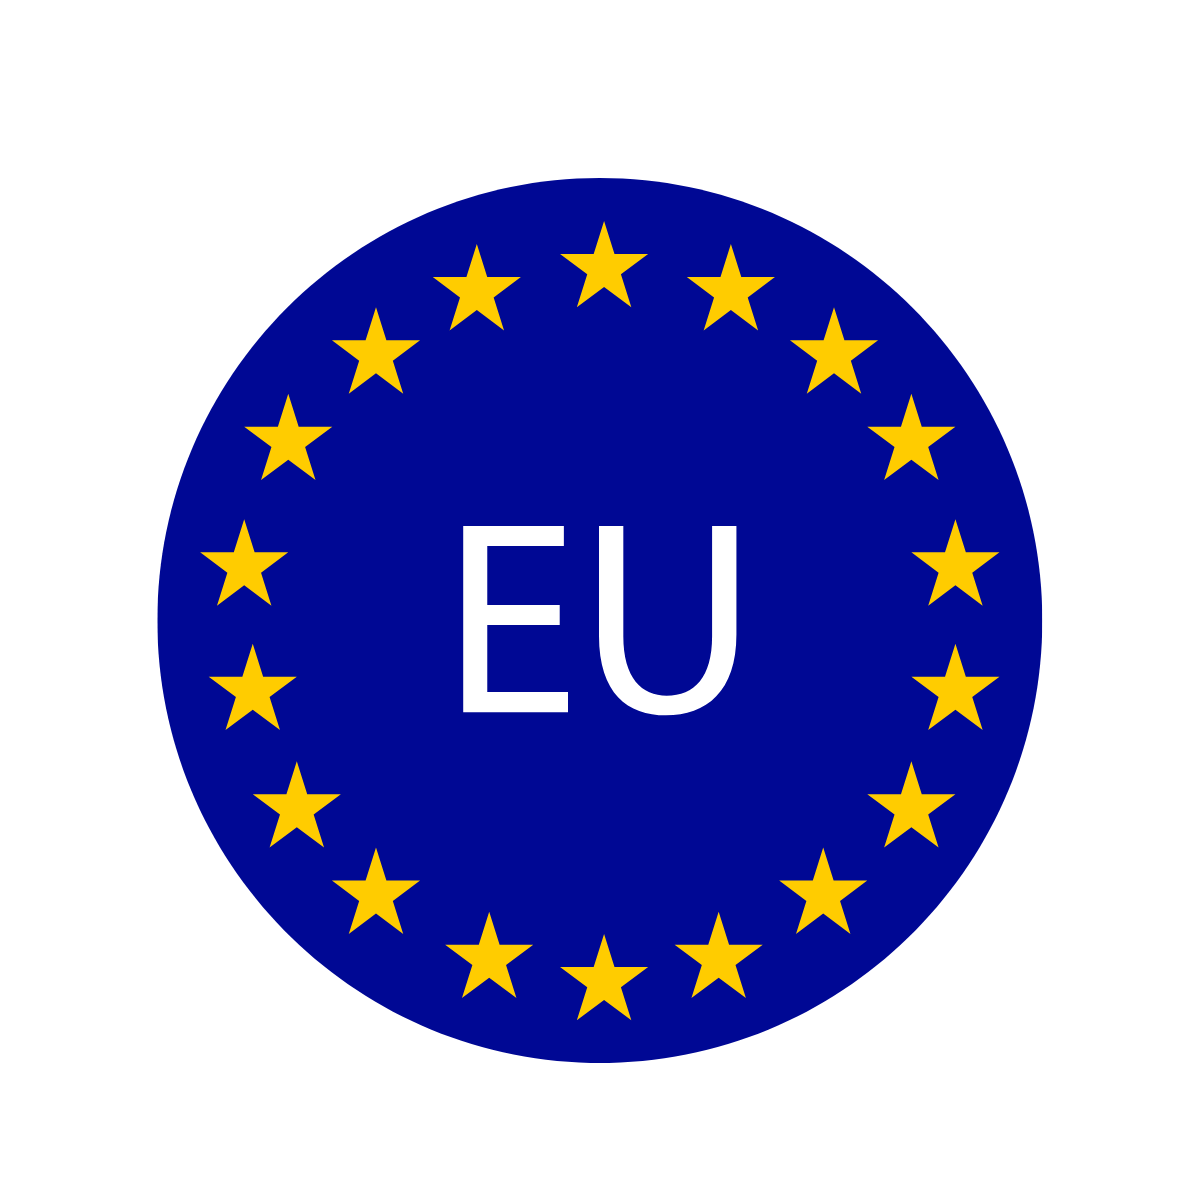 image of a blue circle with EU written in the middle and yellow stars all around the circle. This image represents the European Union (EU). The imaged is used by Patient Guard limited to highlight their EU Authorised Representative (EUAR) services and also to highlight areas on their website that cover EU regulatory requirements or news.